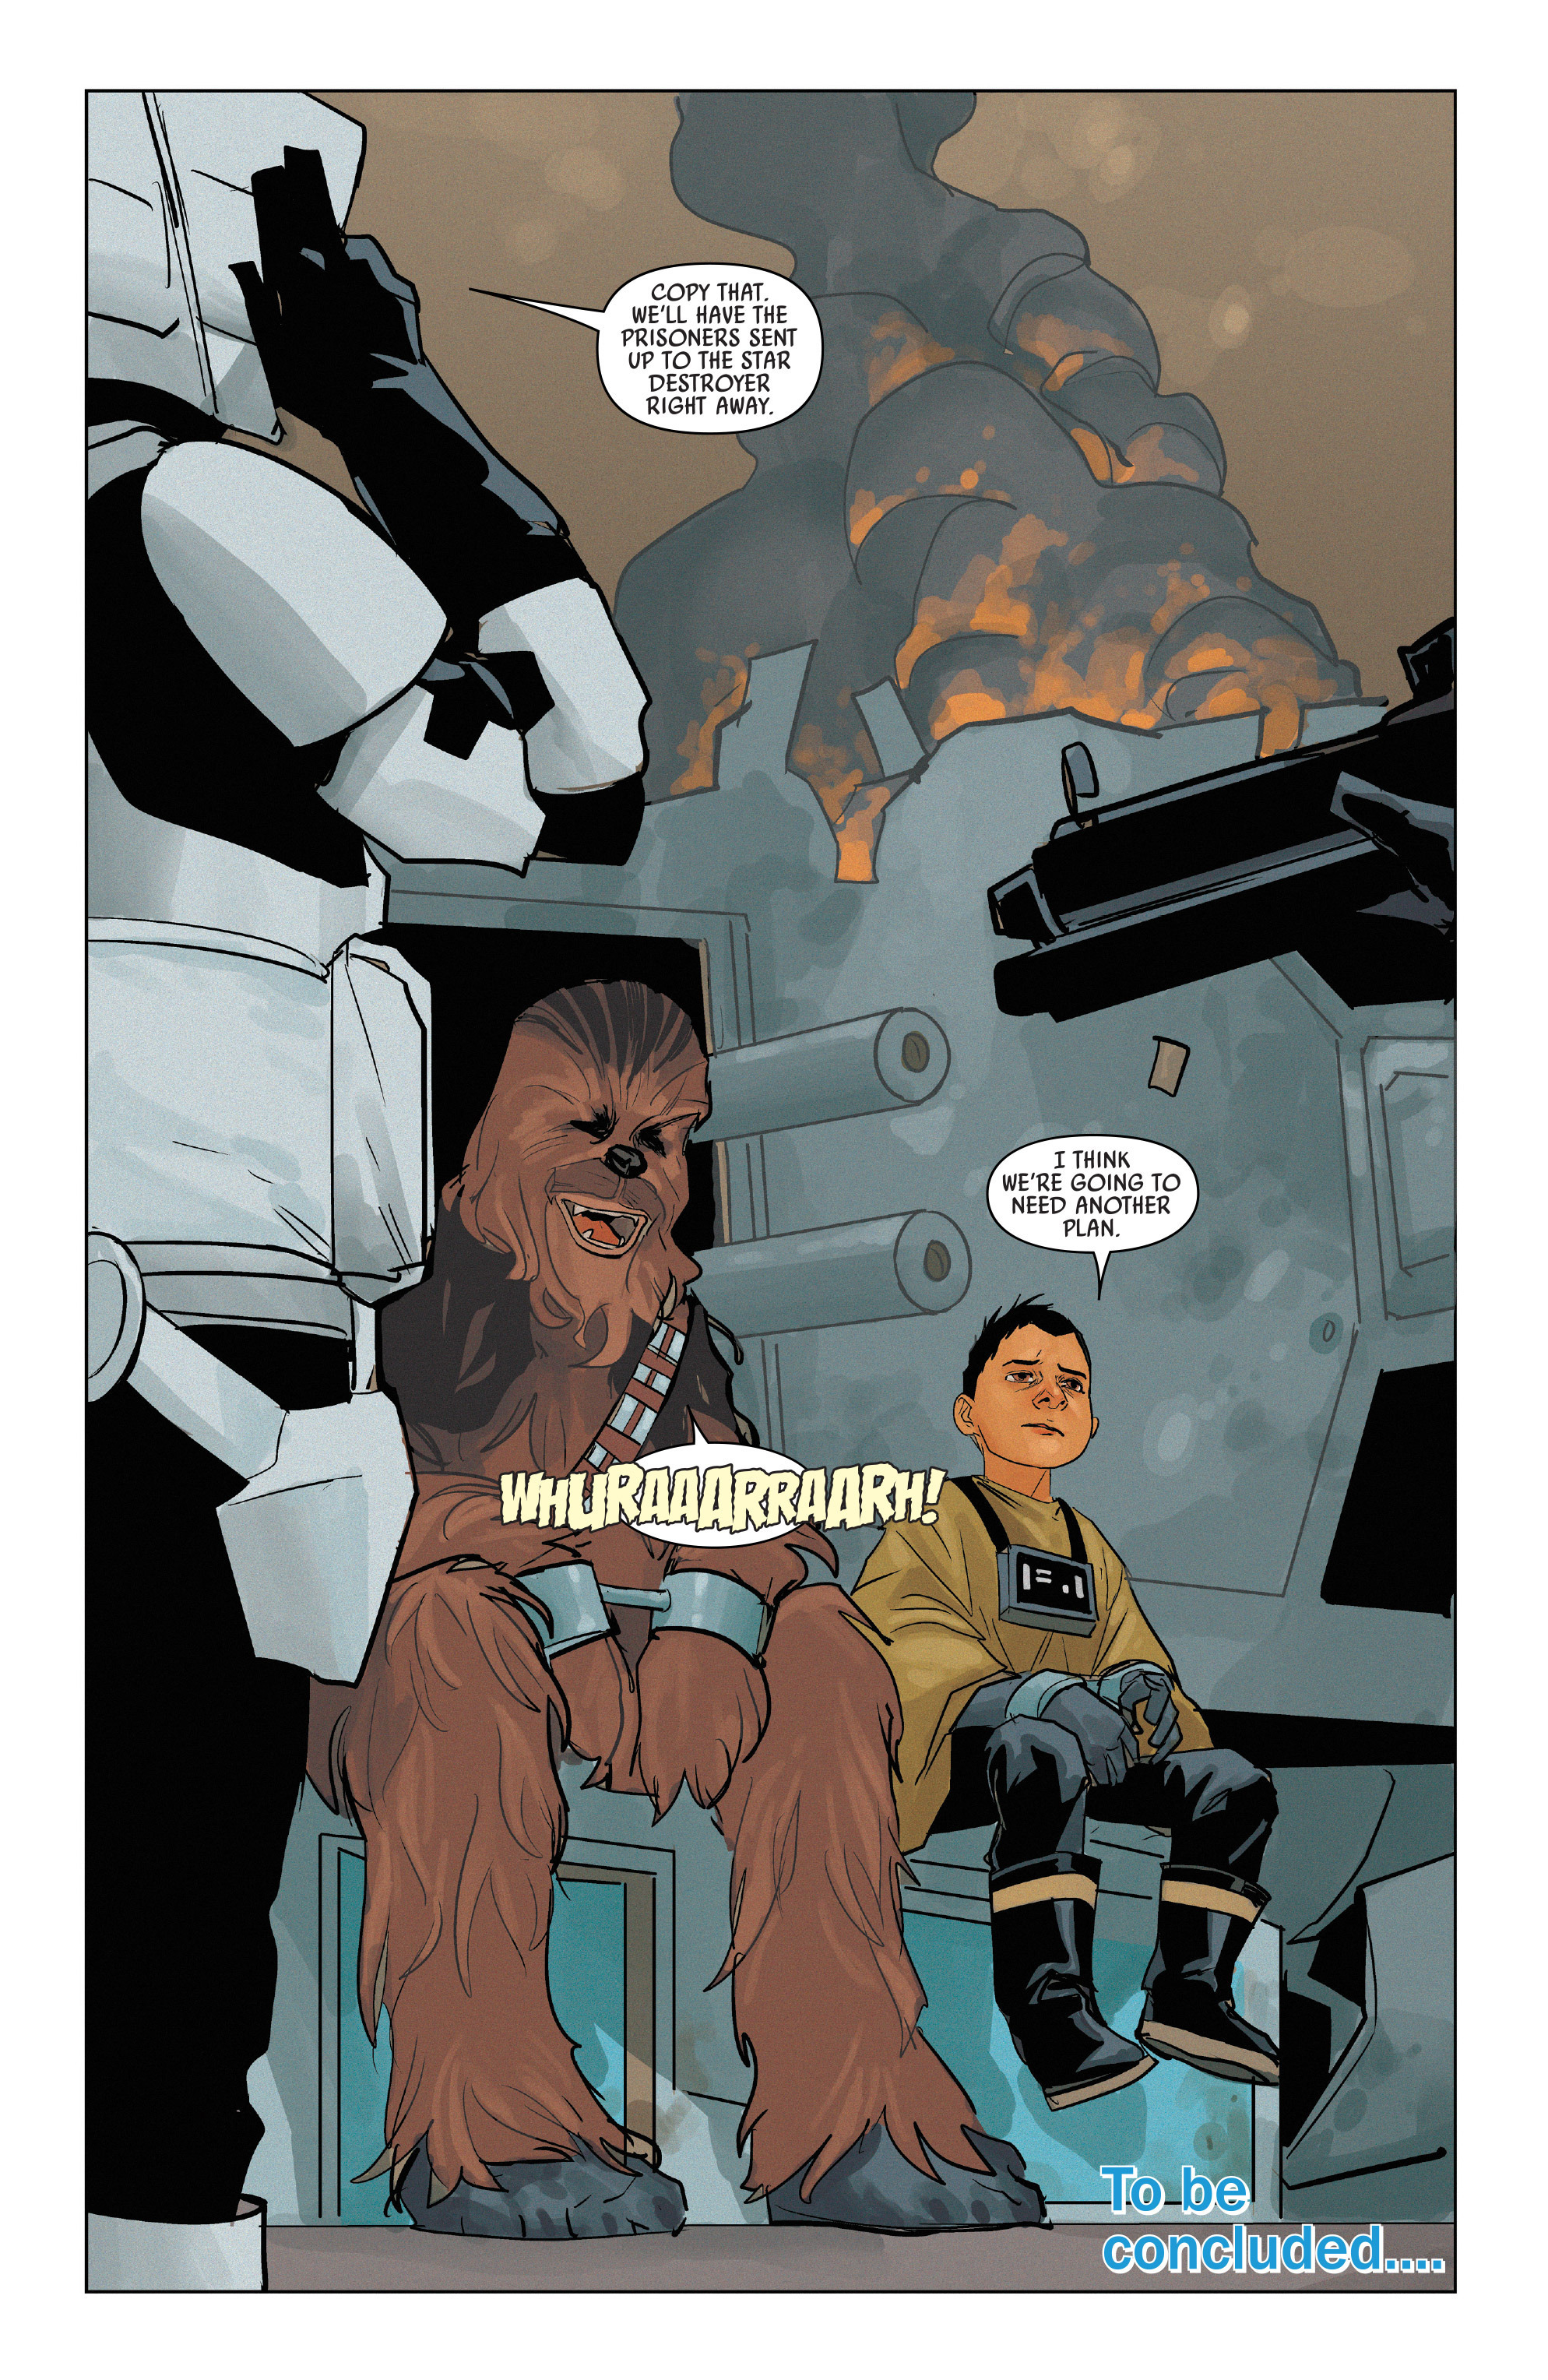 Read online Chewbacca comic -  Issue #4 - 22